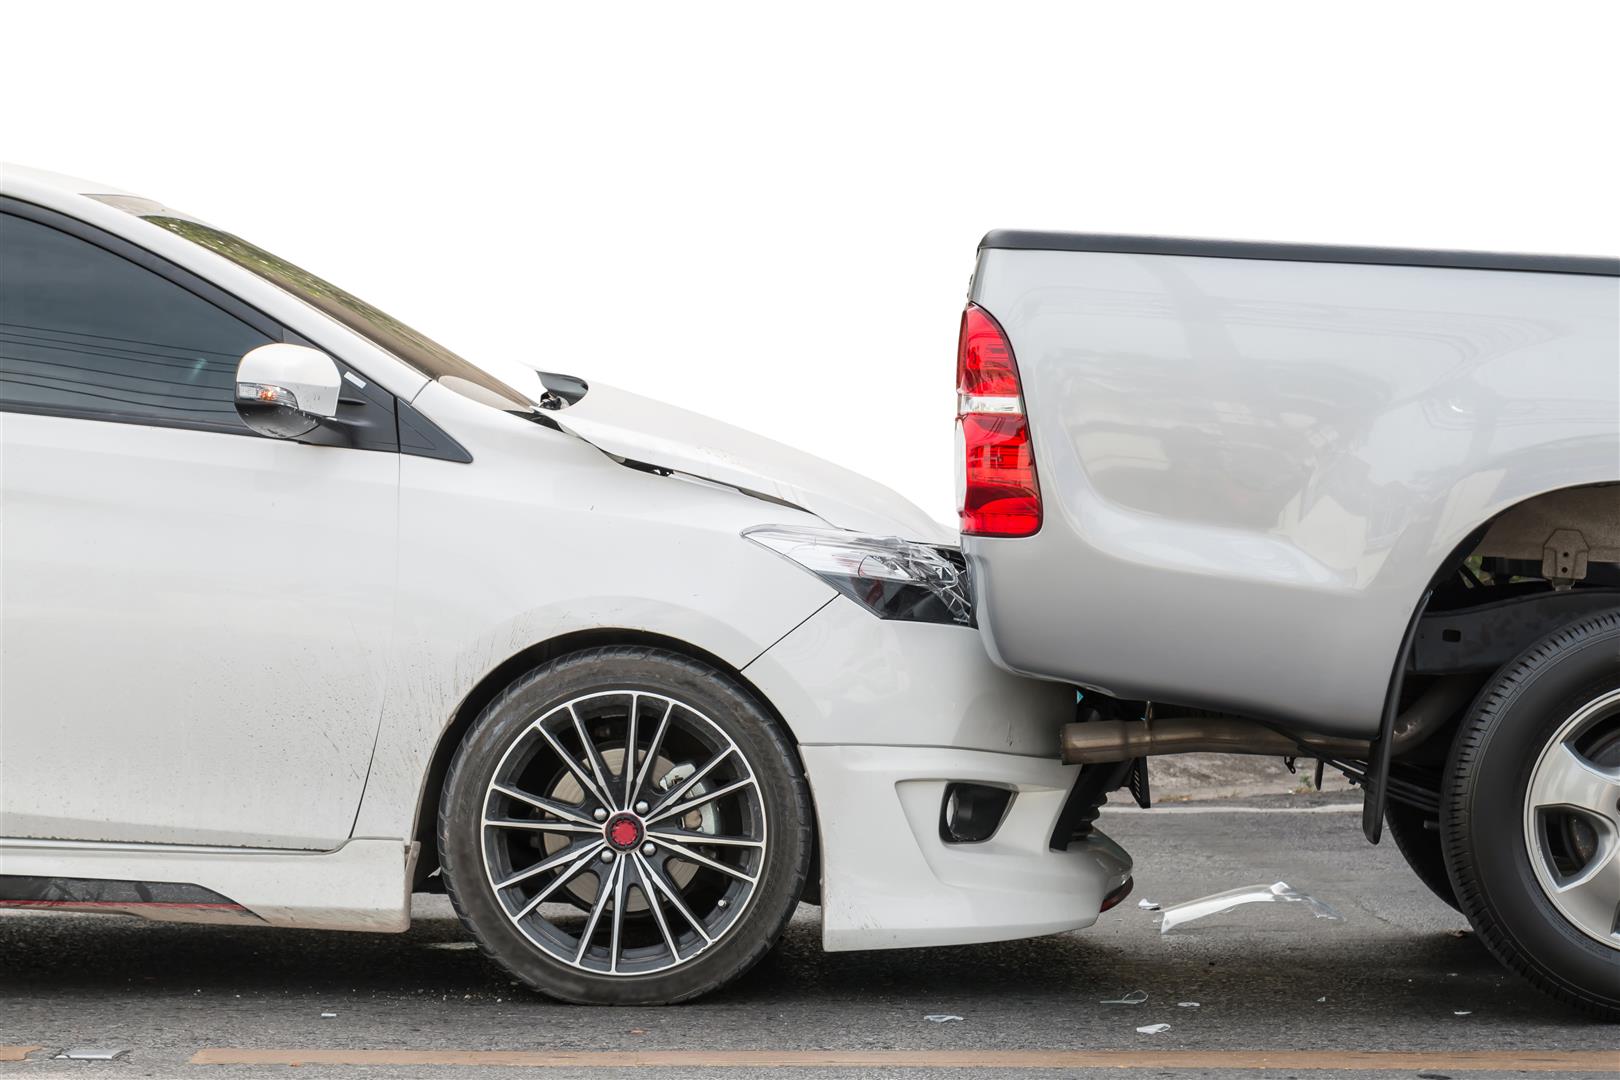 Pay Attention to Your Car After a Minor Fender Bender